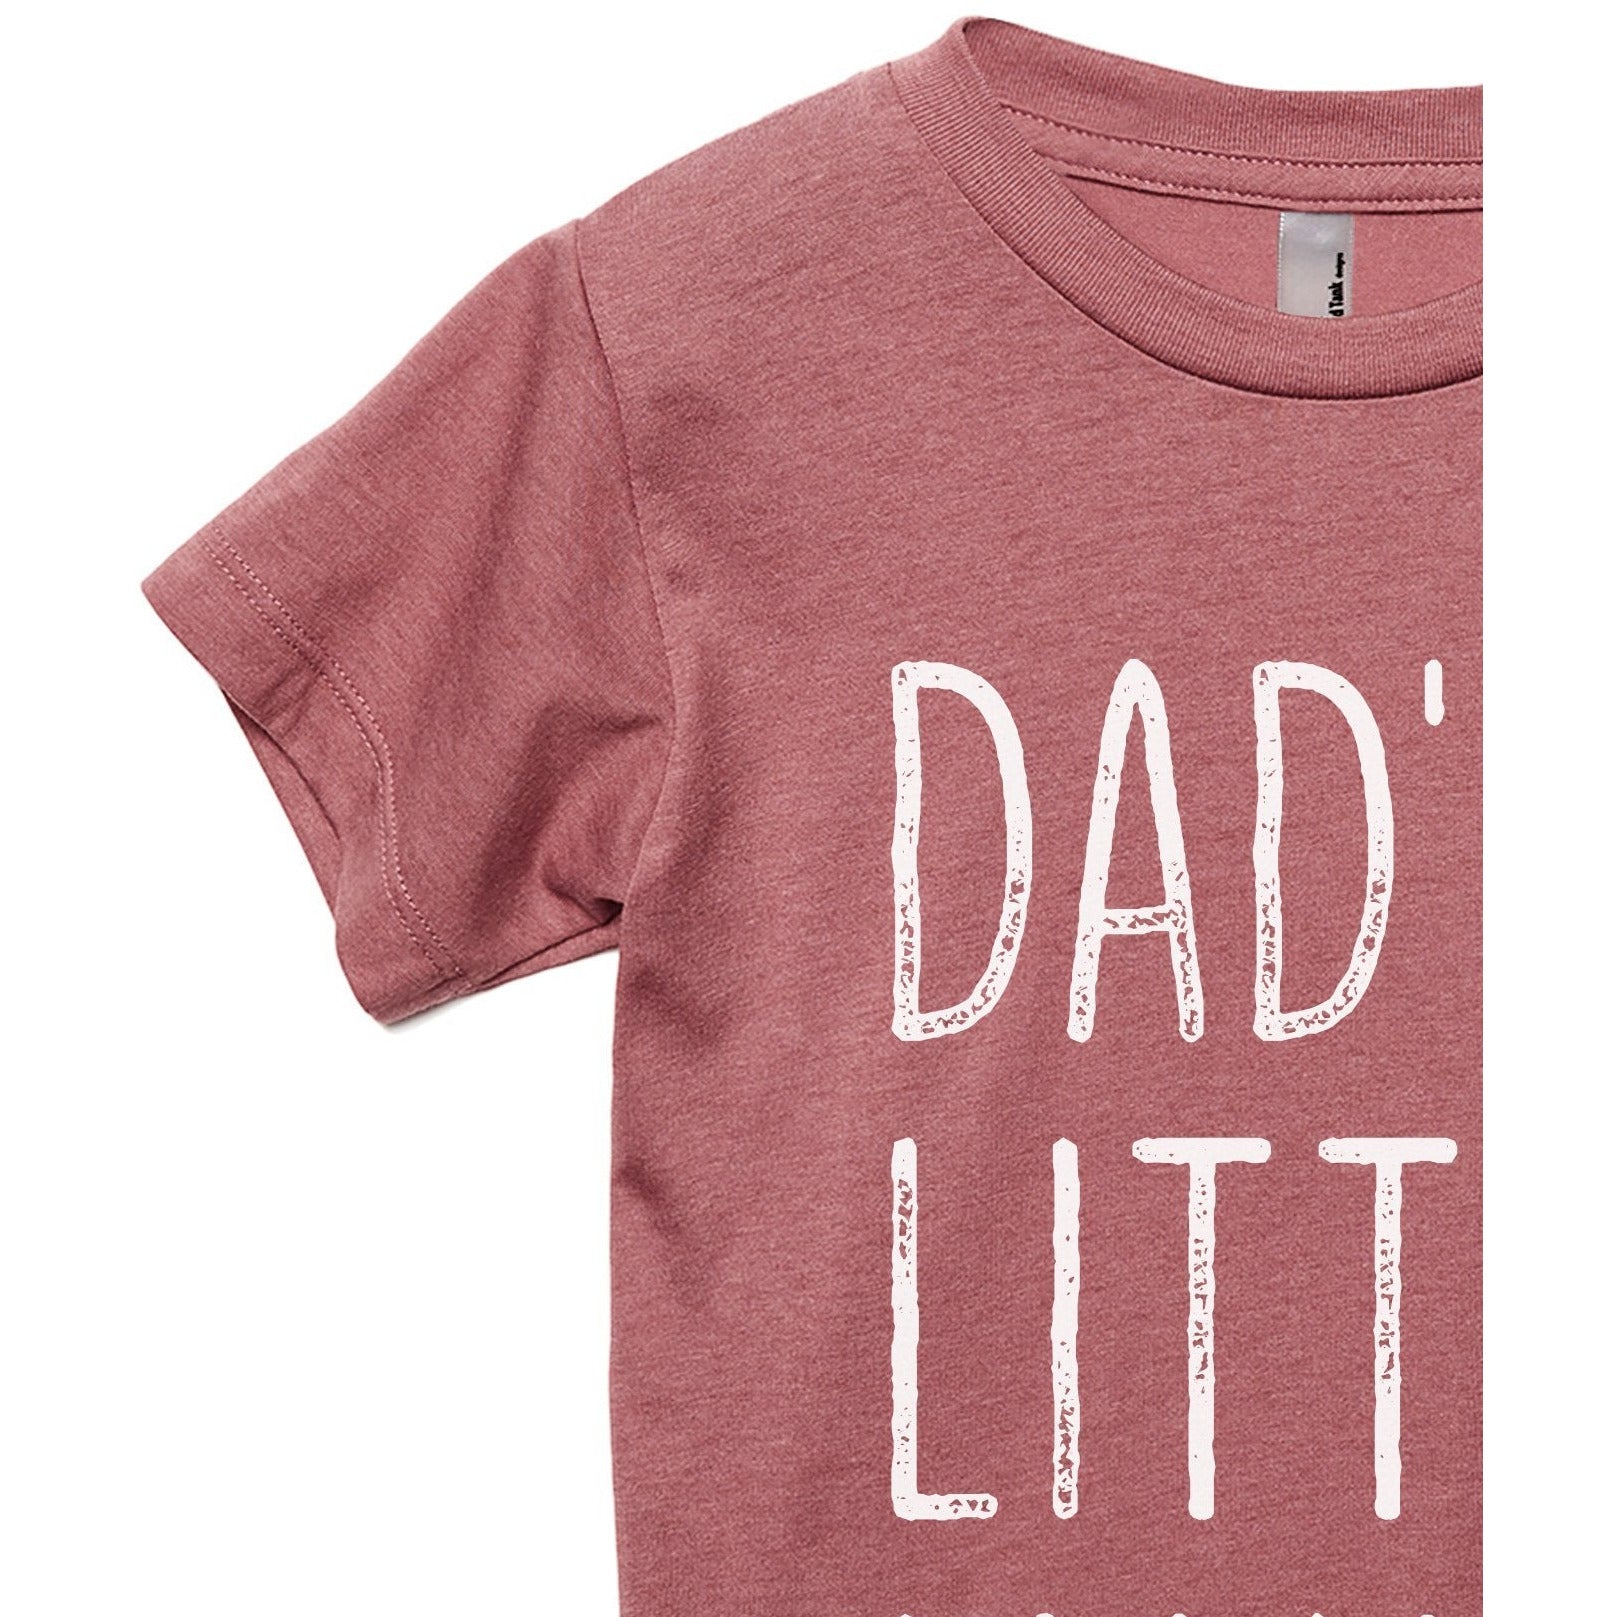 Dad's Little Man Toddler's Go-To Crewneck Tee Heather Grey Close Up Sleeves Collar Details
